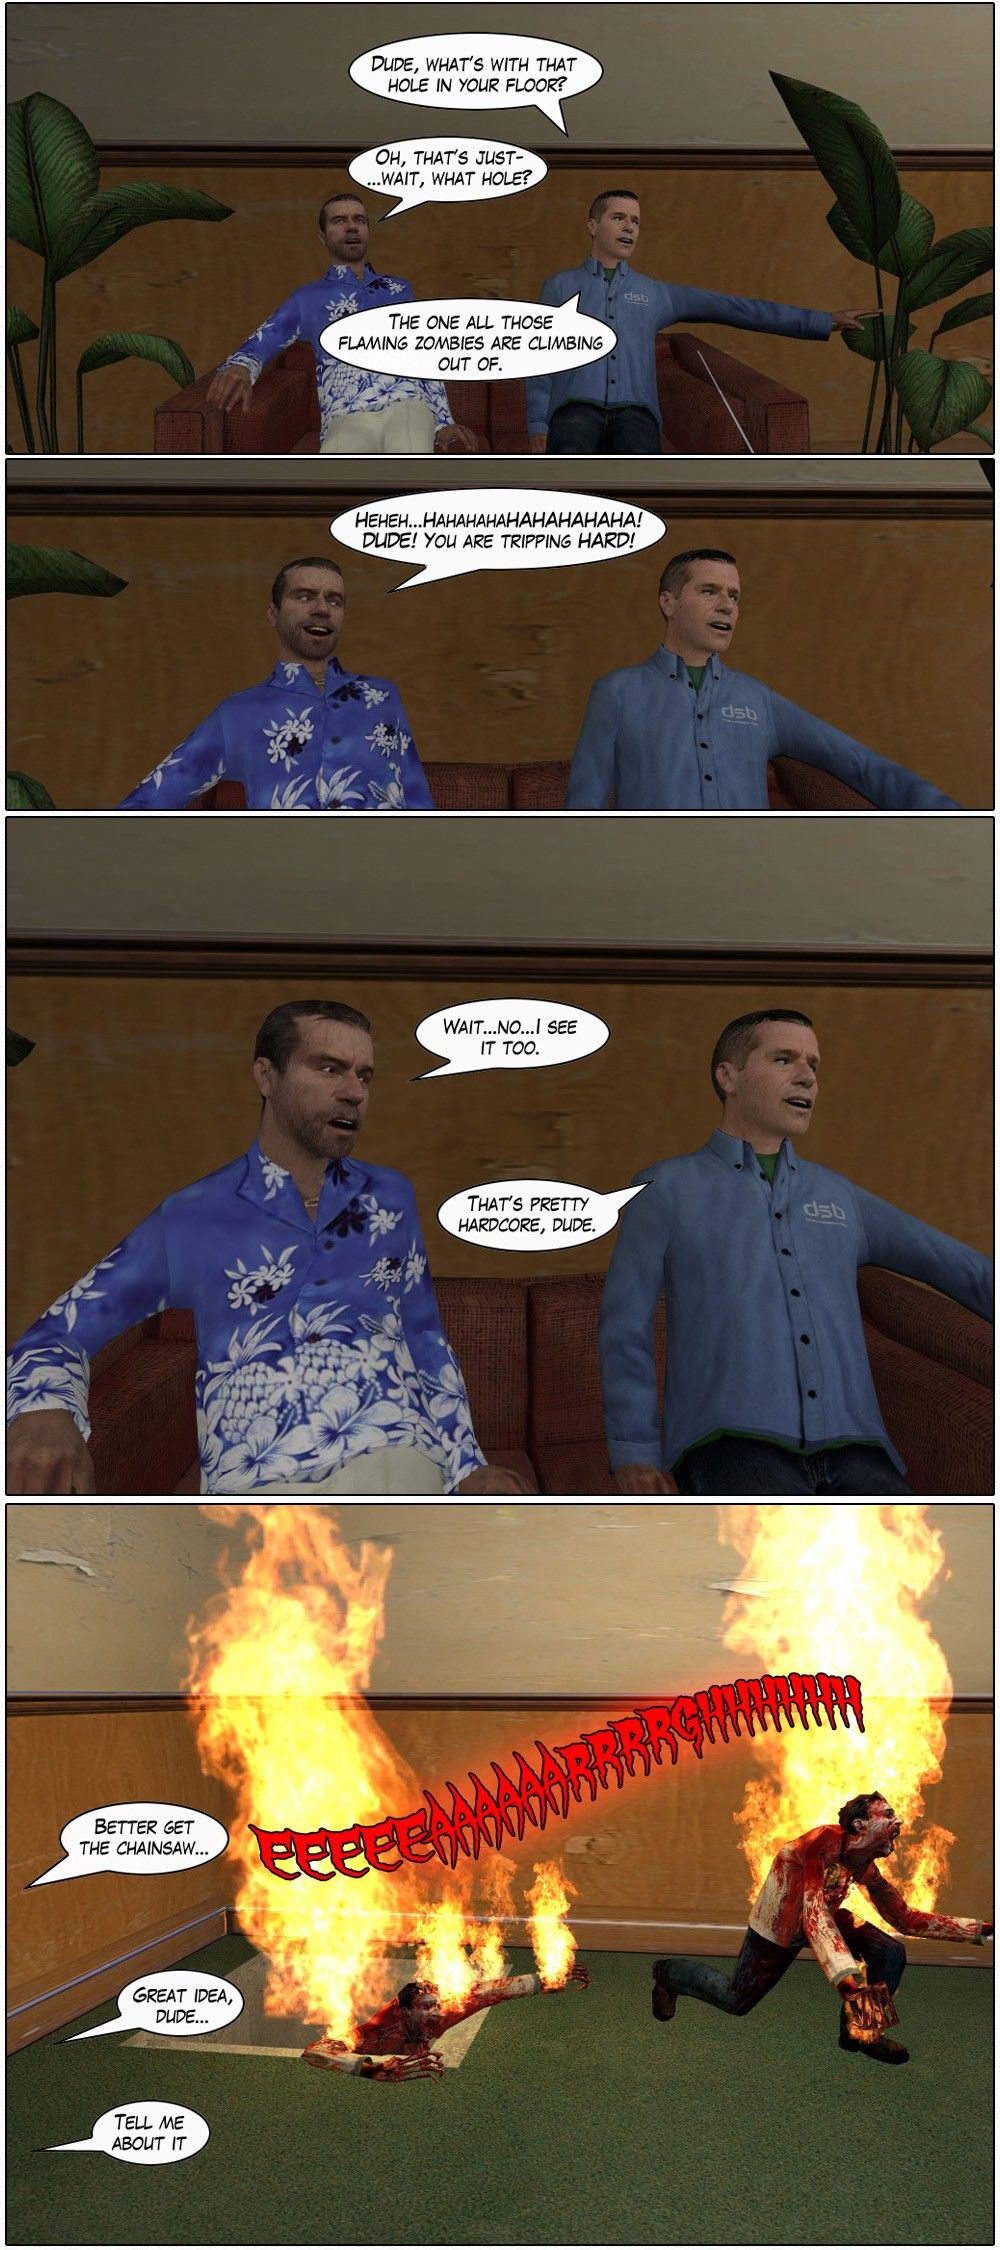 Two guys, one wearing a blue Hawaiian shirt, are sitting together on a couch. The other guy asks the Hawaiian shirt guy dude, what's with that hole in your floor. The Hawaiian shirt guy starts to reply, but then asks wait, what hole. His friend says the one all those flaming zombies are climbing out of. The Hawaiian shirt guy cracks up in laughter and tells his friend he's tripping hard. He then goes serious, however, as he realizes he sees it too. His friend calls it pretty hardcore. We then see burning zombies climbing out of a hole in the corner of the room. One of them says better get the chainsaw, his friend says great idea, dude, and the first says tell me about it. The end.